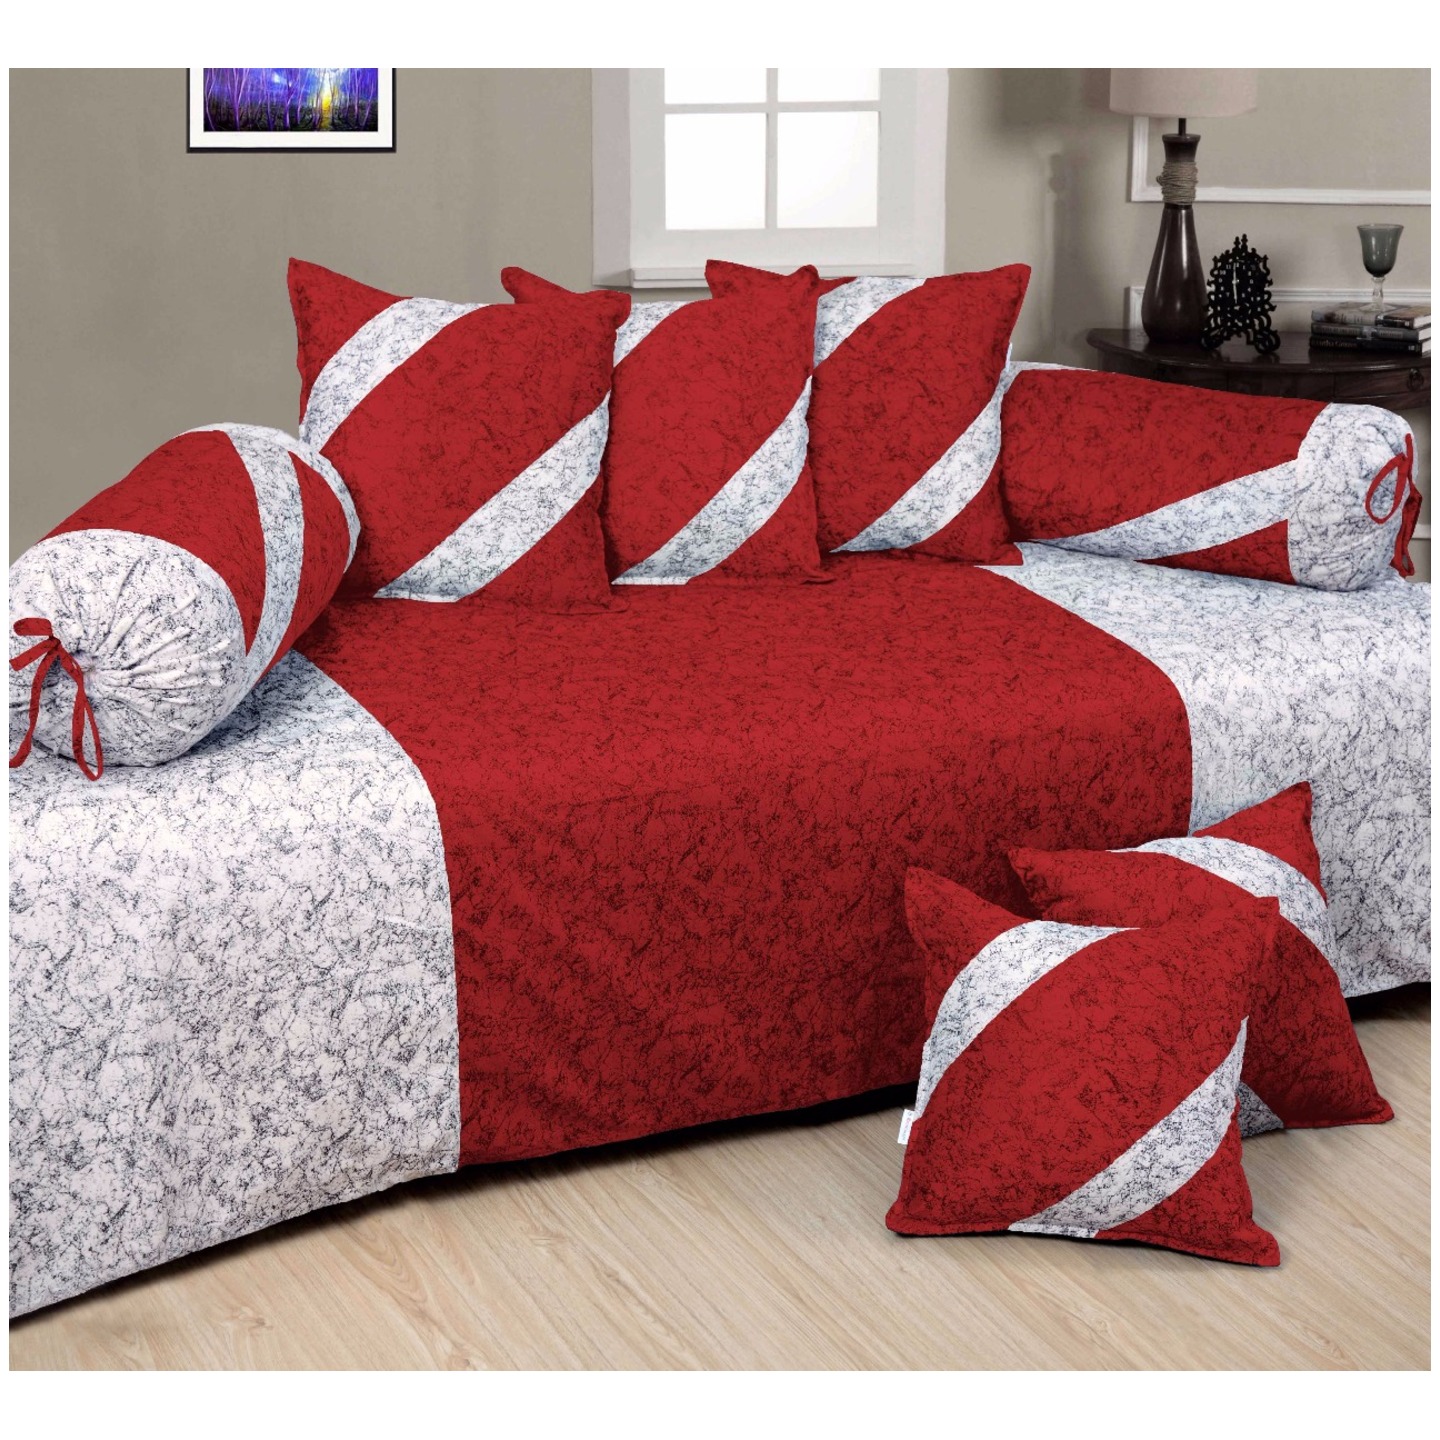 HandTex Home Presents Velvet Maroon Color Diwan Set with 1 Single Bedsheet with 5 Cushion Covers & 2 Blosters Set of 8 pcs